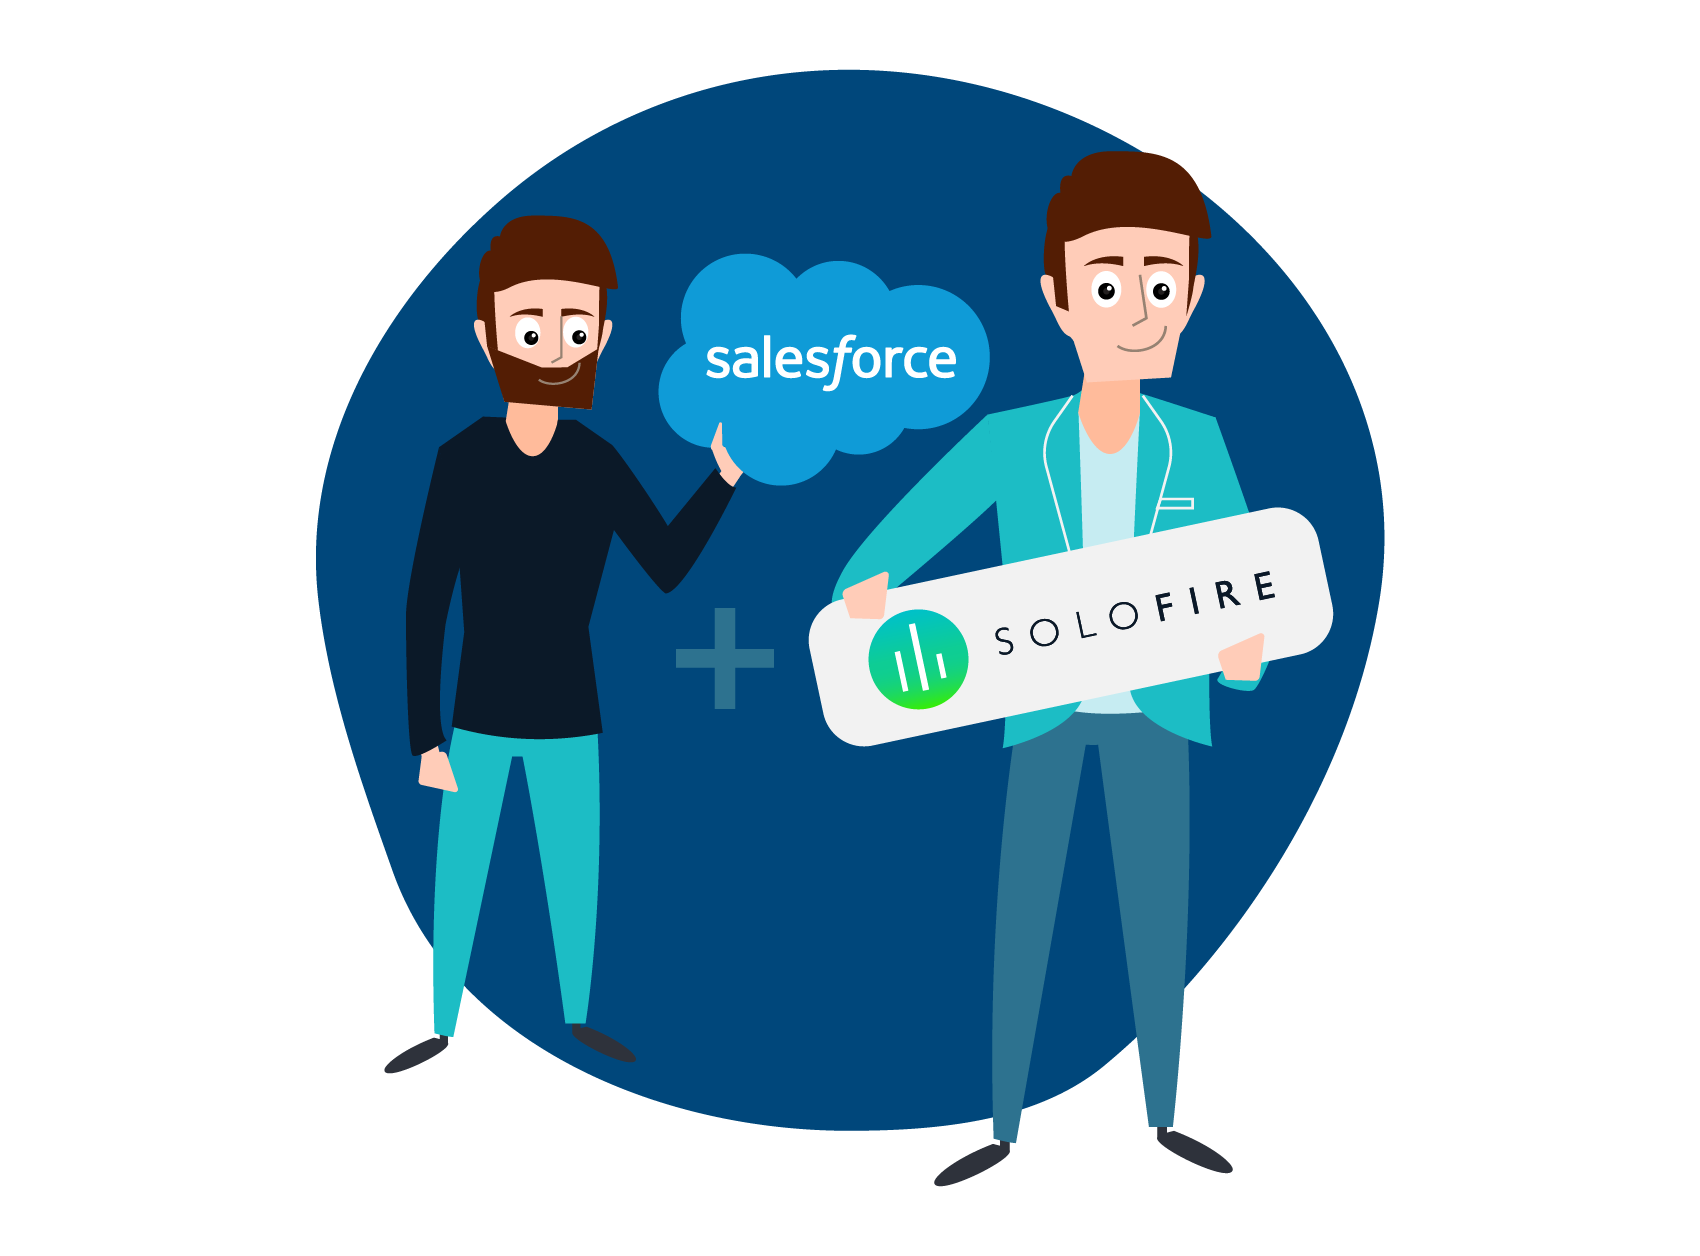 Salesforce integration with SoloFire, a sales enablement solution